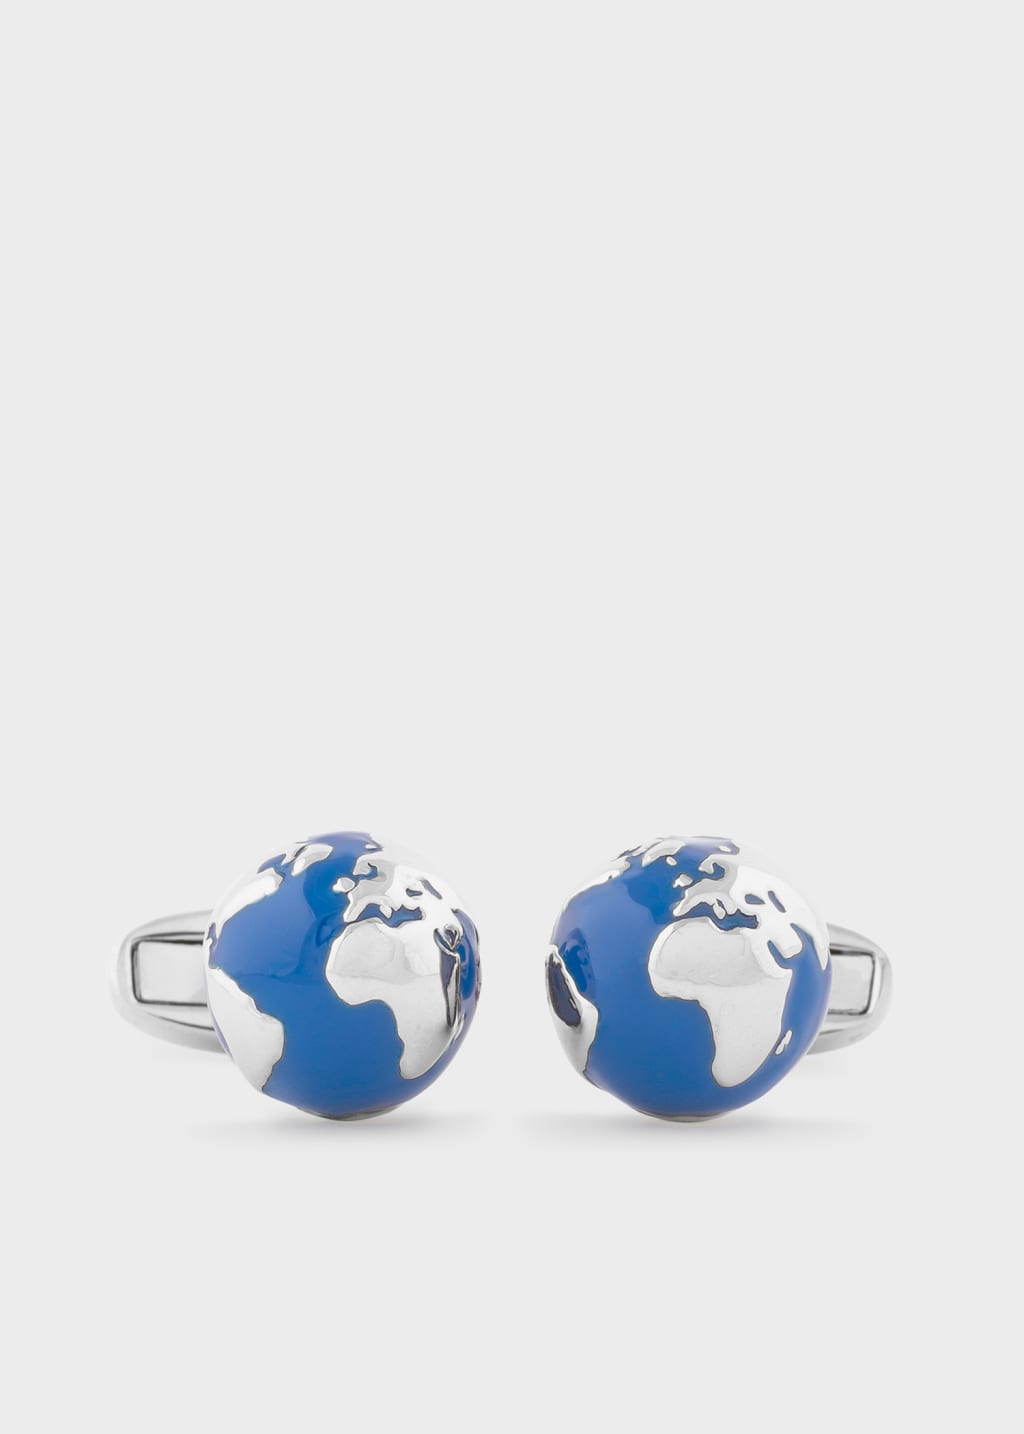 Front View - Navy and Silver Globe Cufflinks Paul Smith